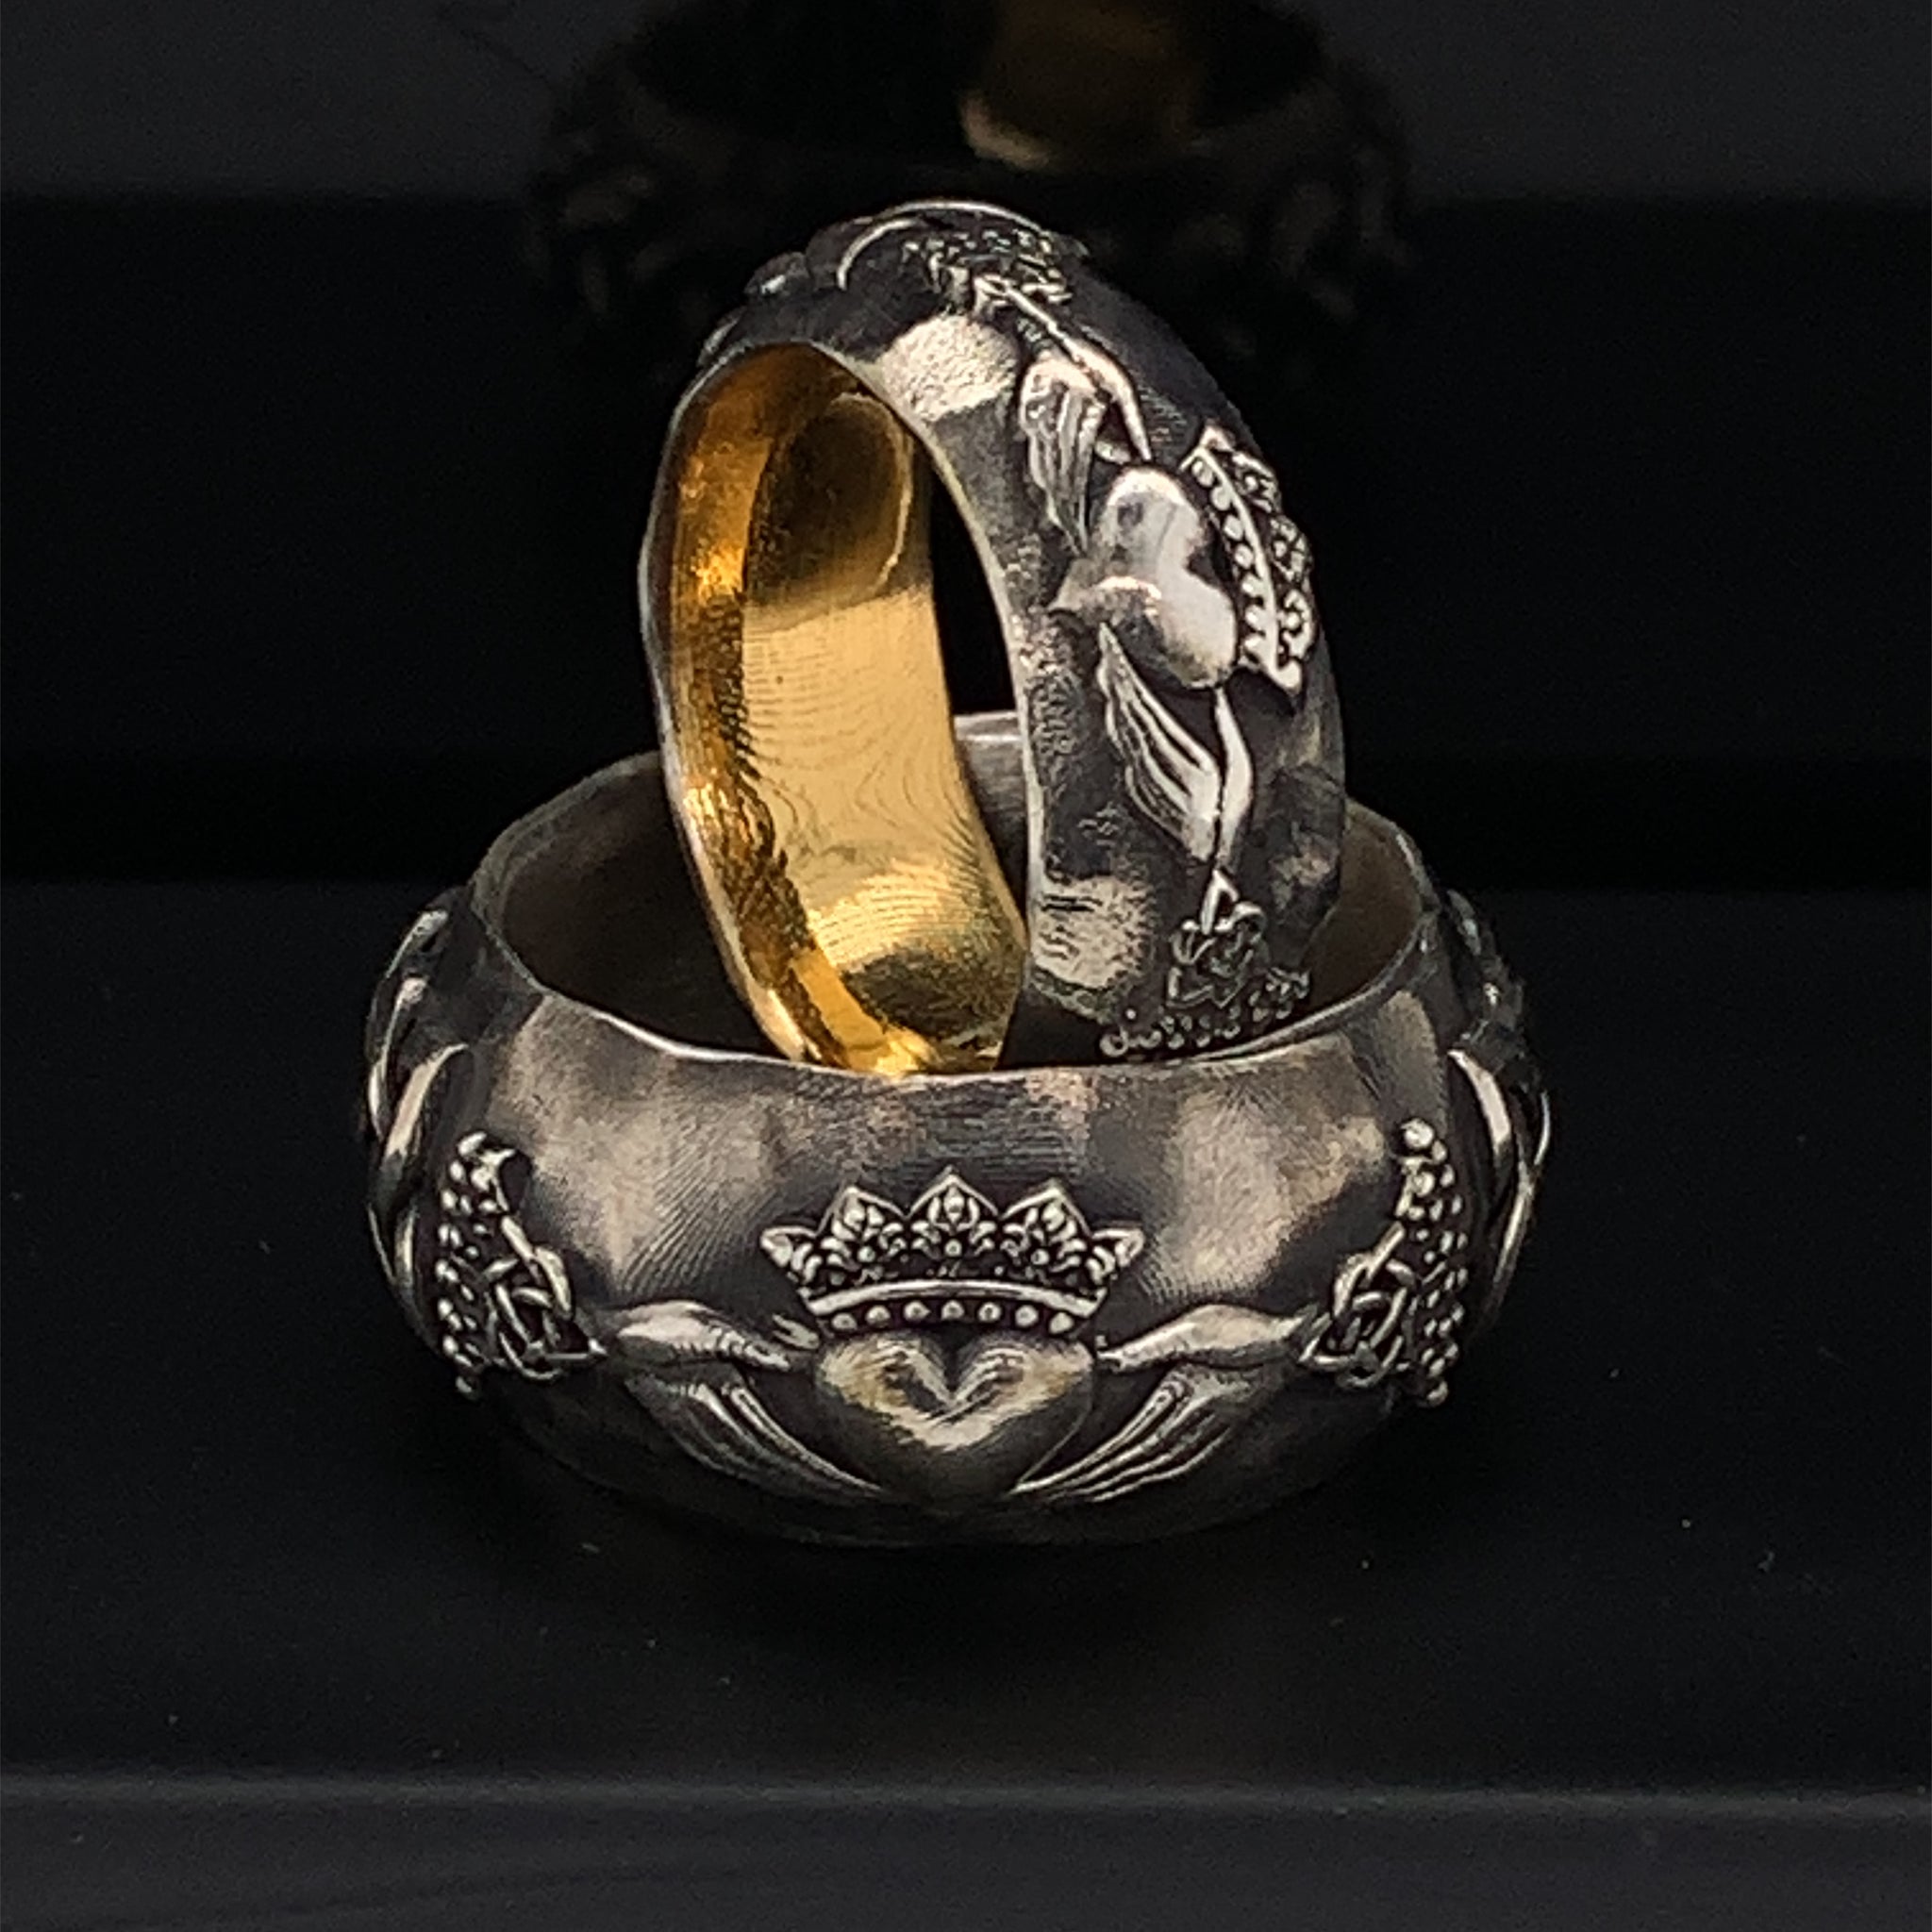 Claddagh Ring: A Symbol of Ireland - The New York Times